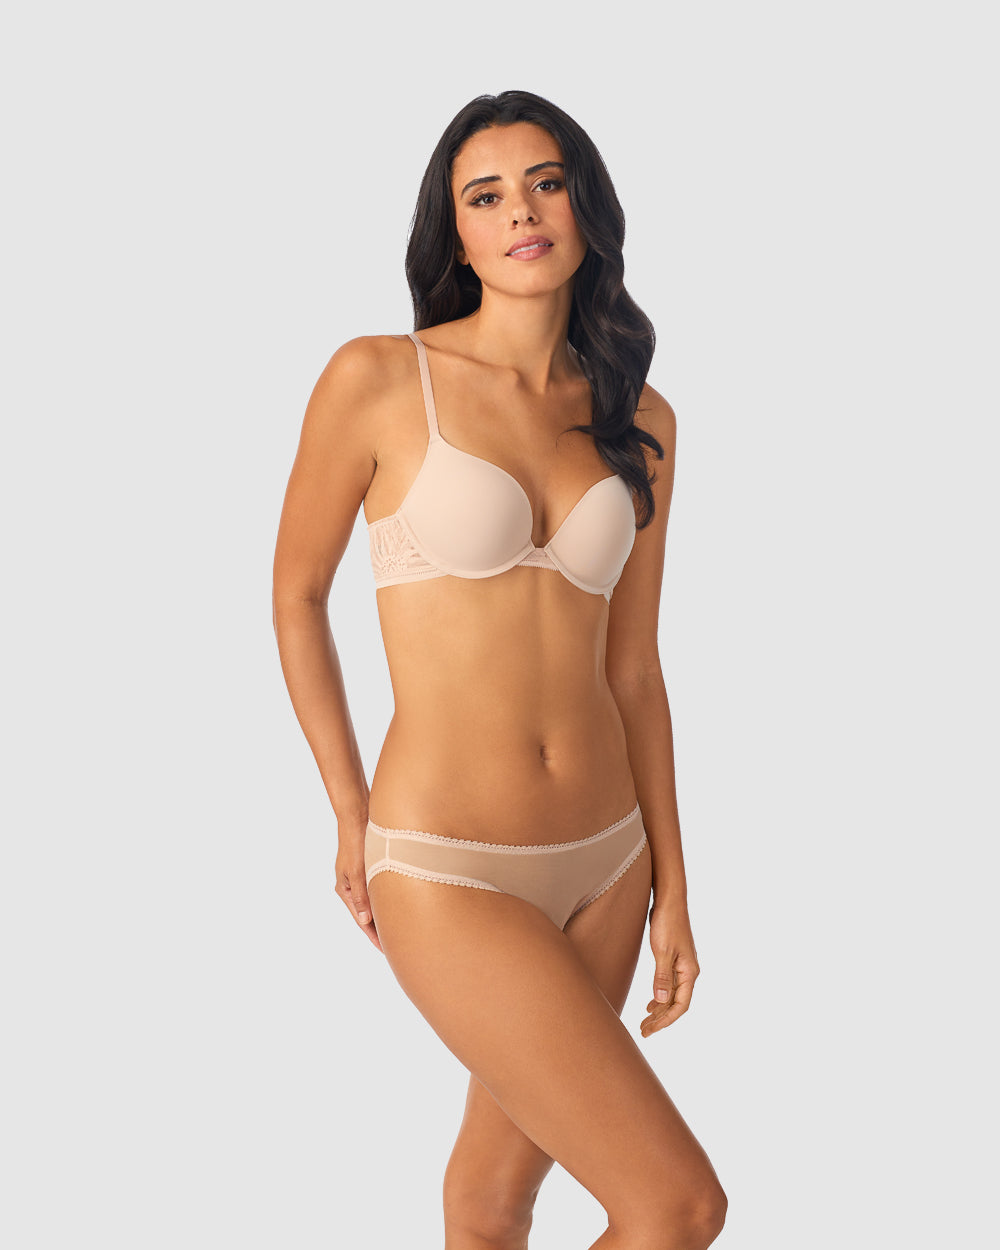 A lady wearing champagne sleek micro push up bra with lace.